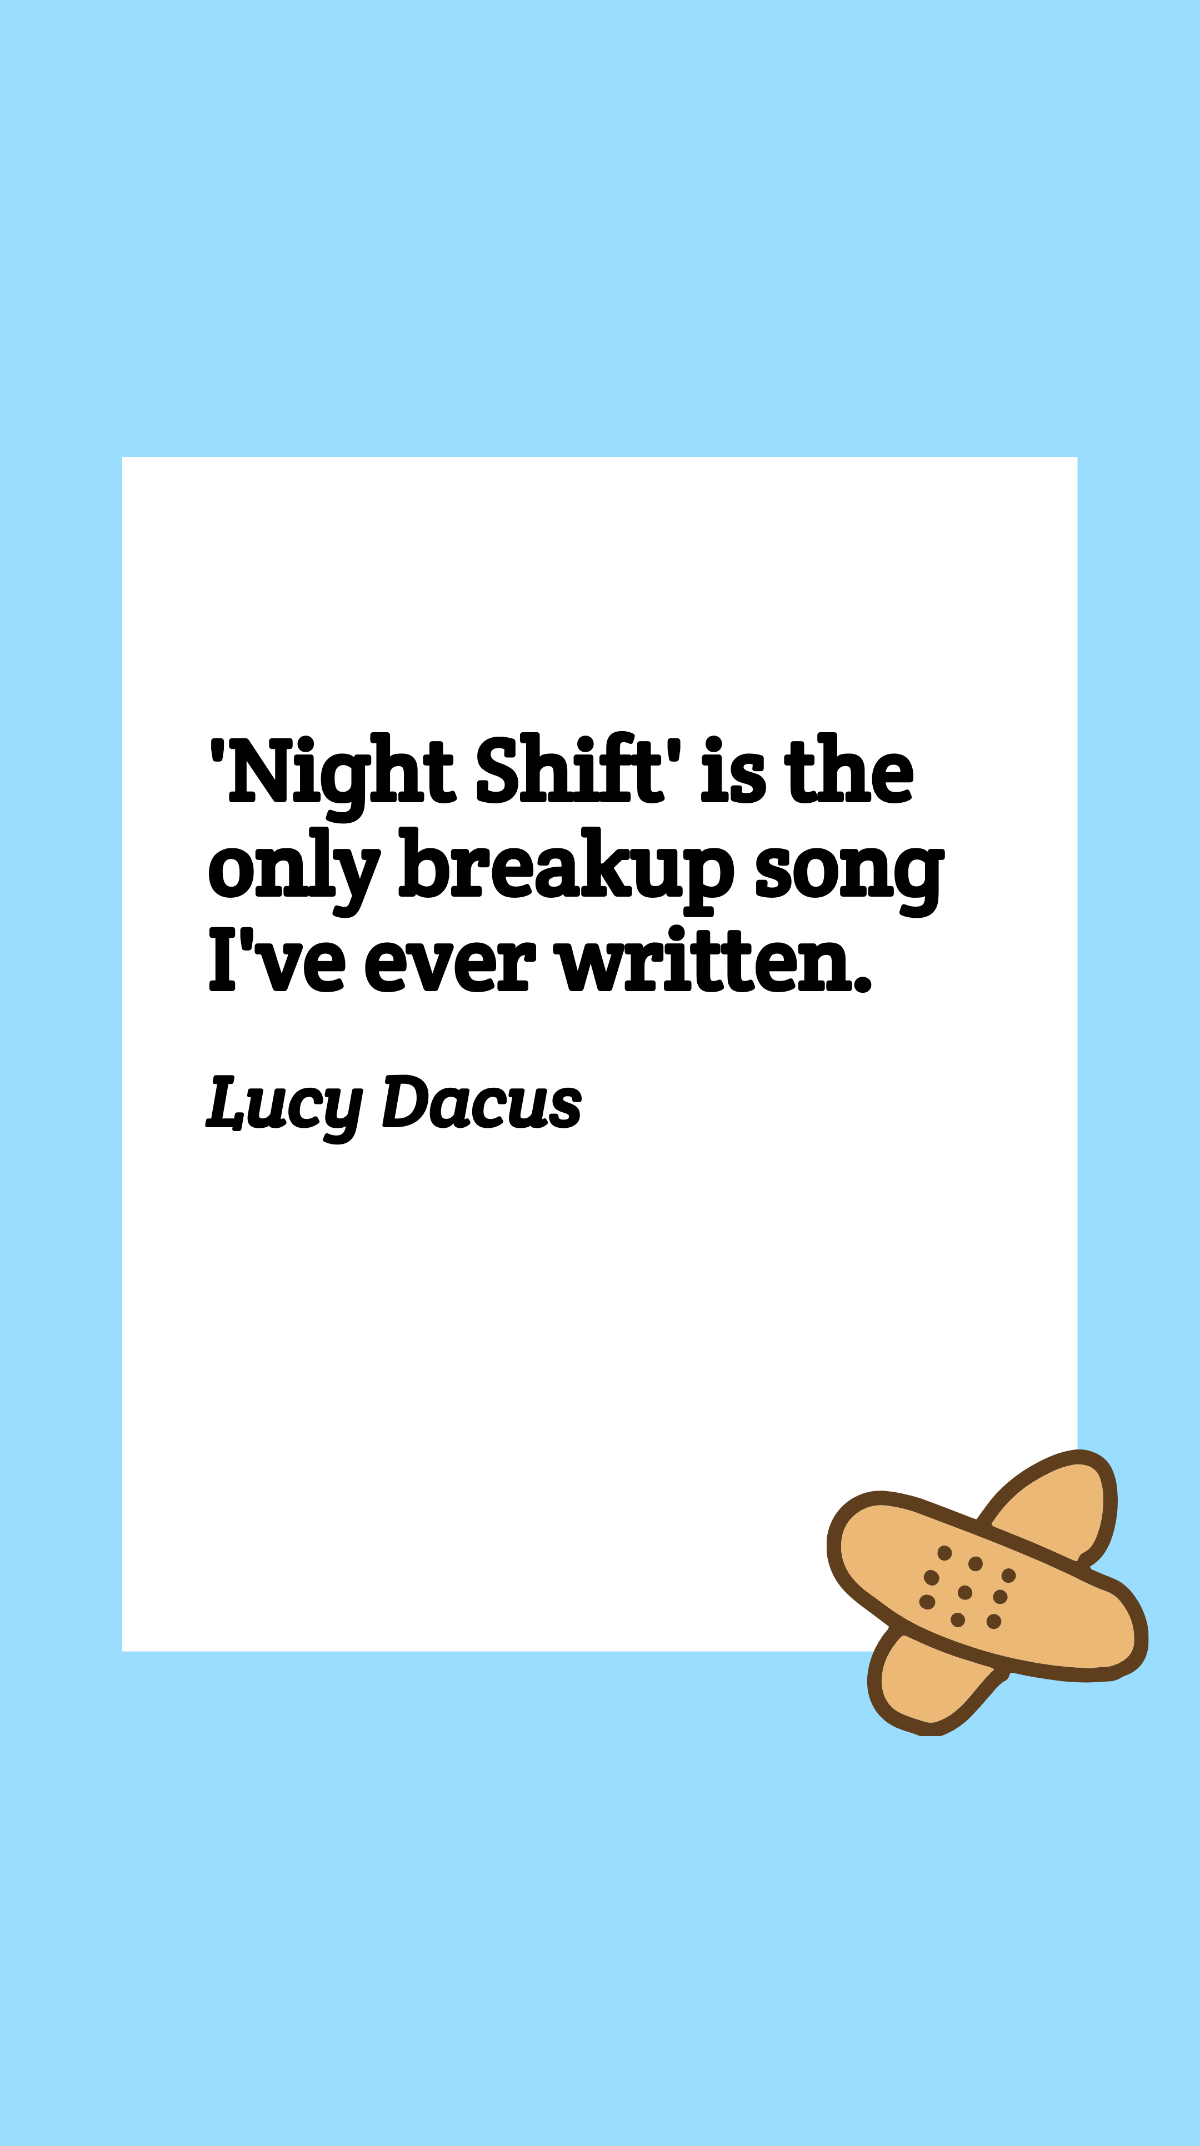 Lucy Dacus - 'Night Shift' is the only breakup song I've ever written.